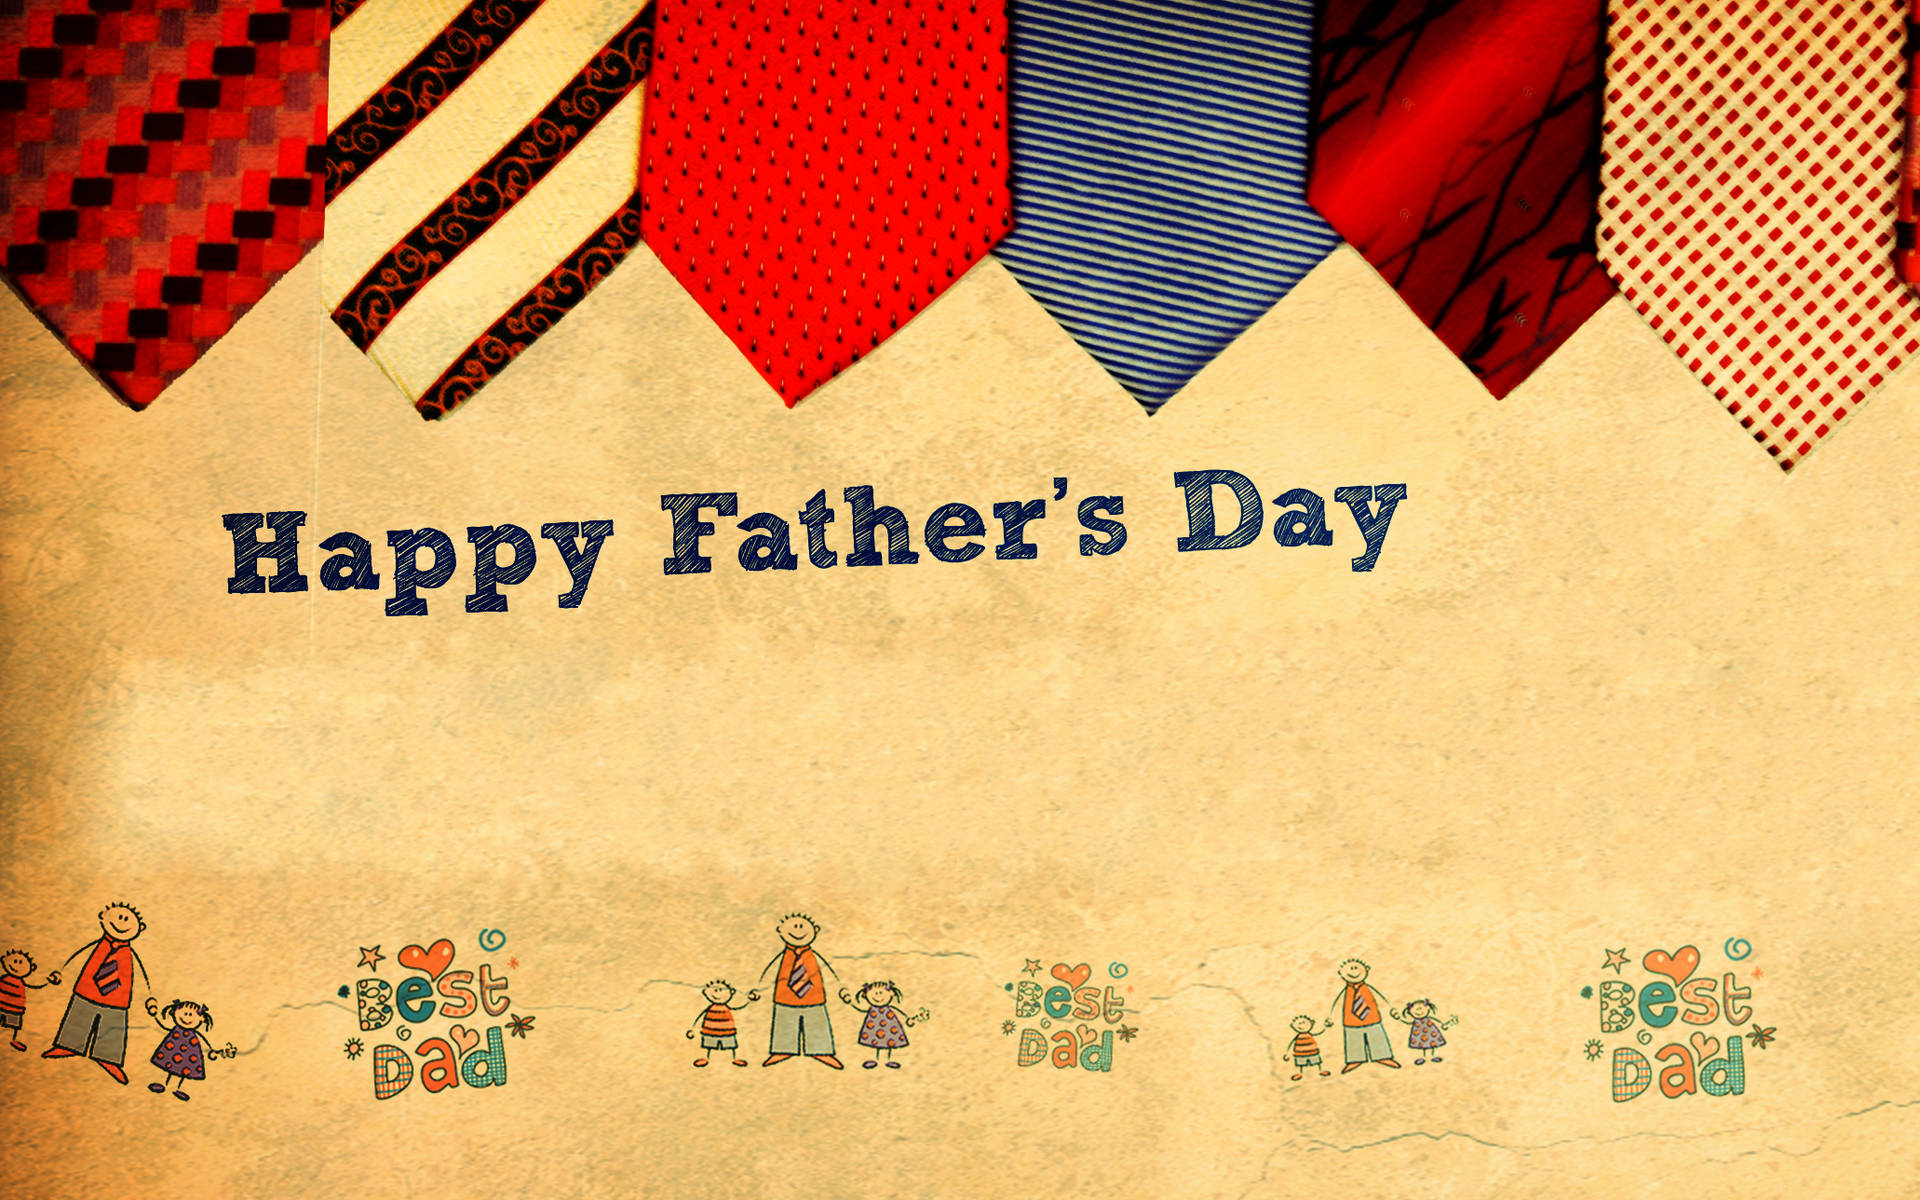 "Give a special Father's Day gift this year with a personalized hand-drawn necktie!" Wallpaper